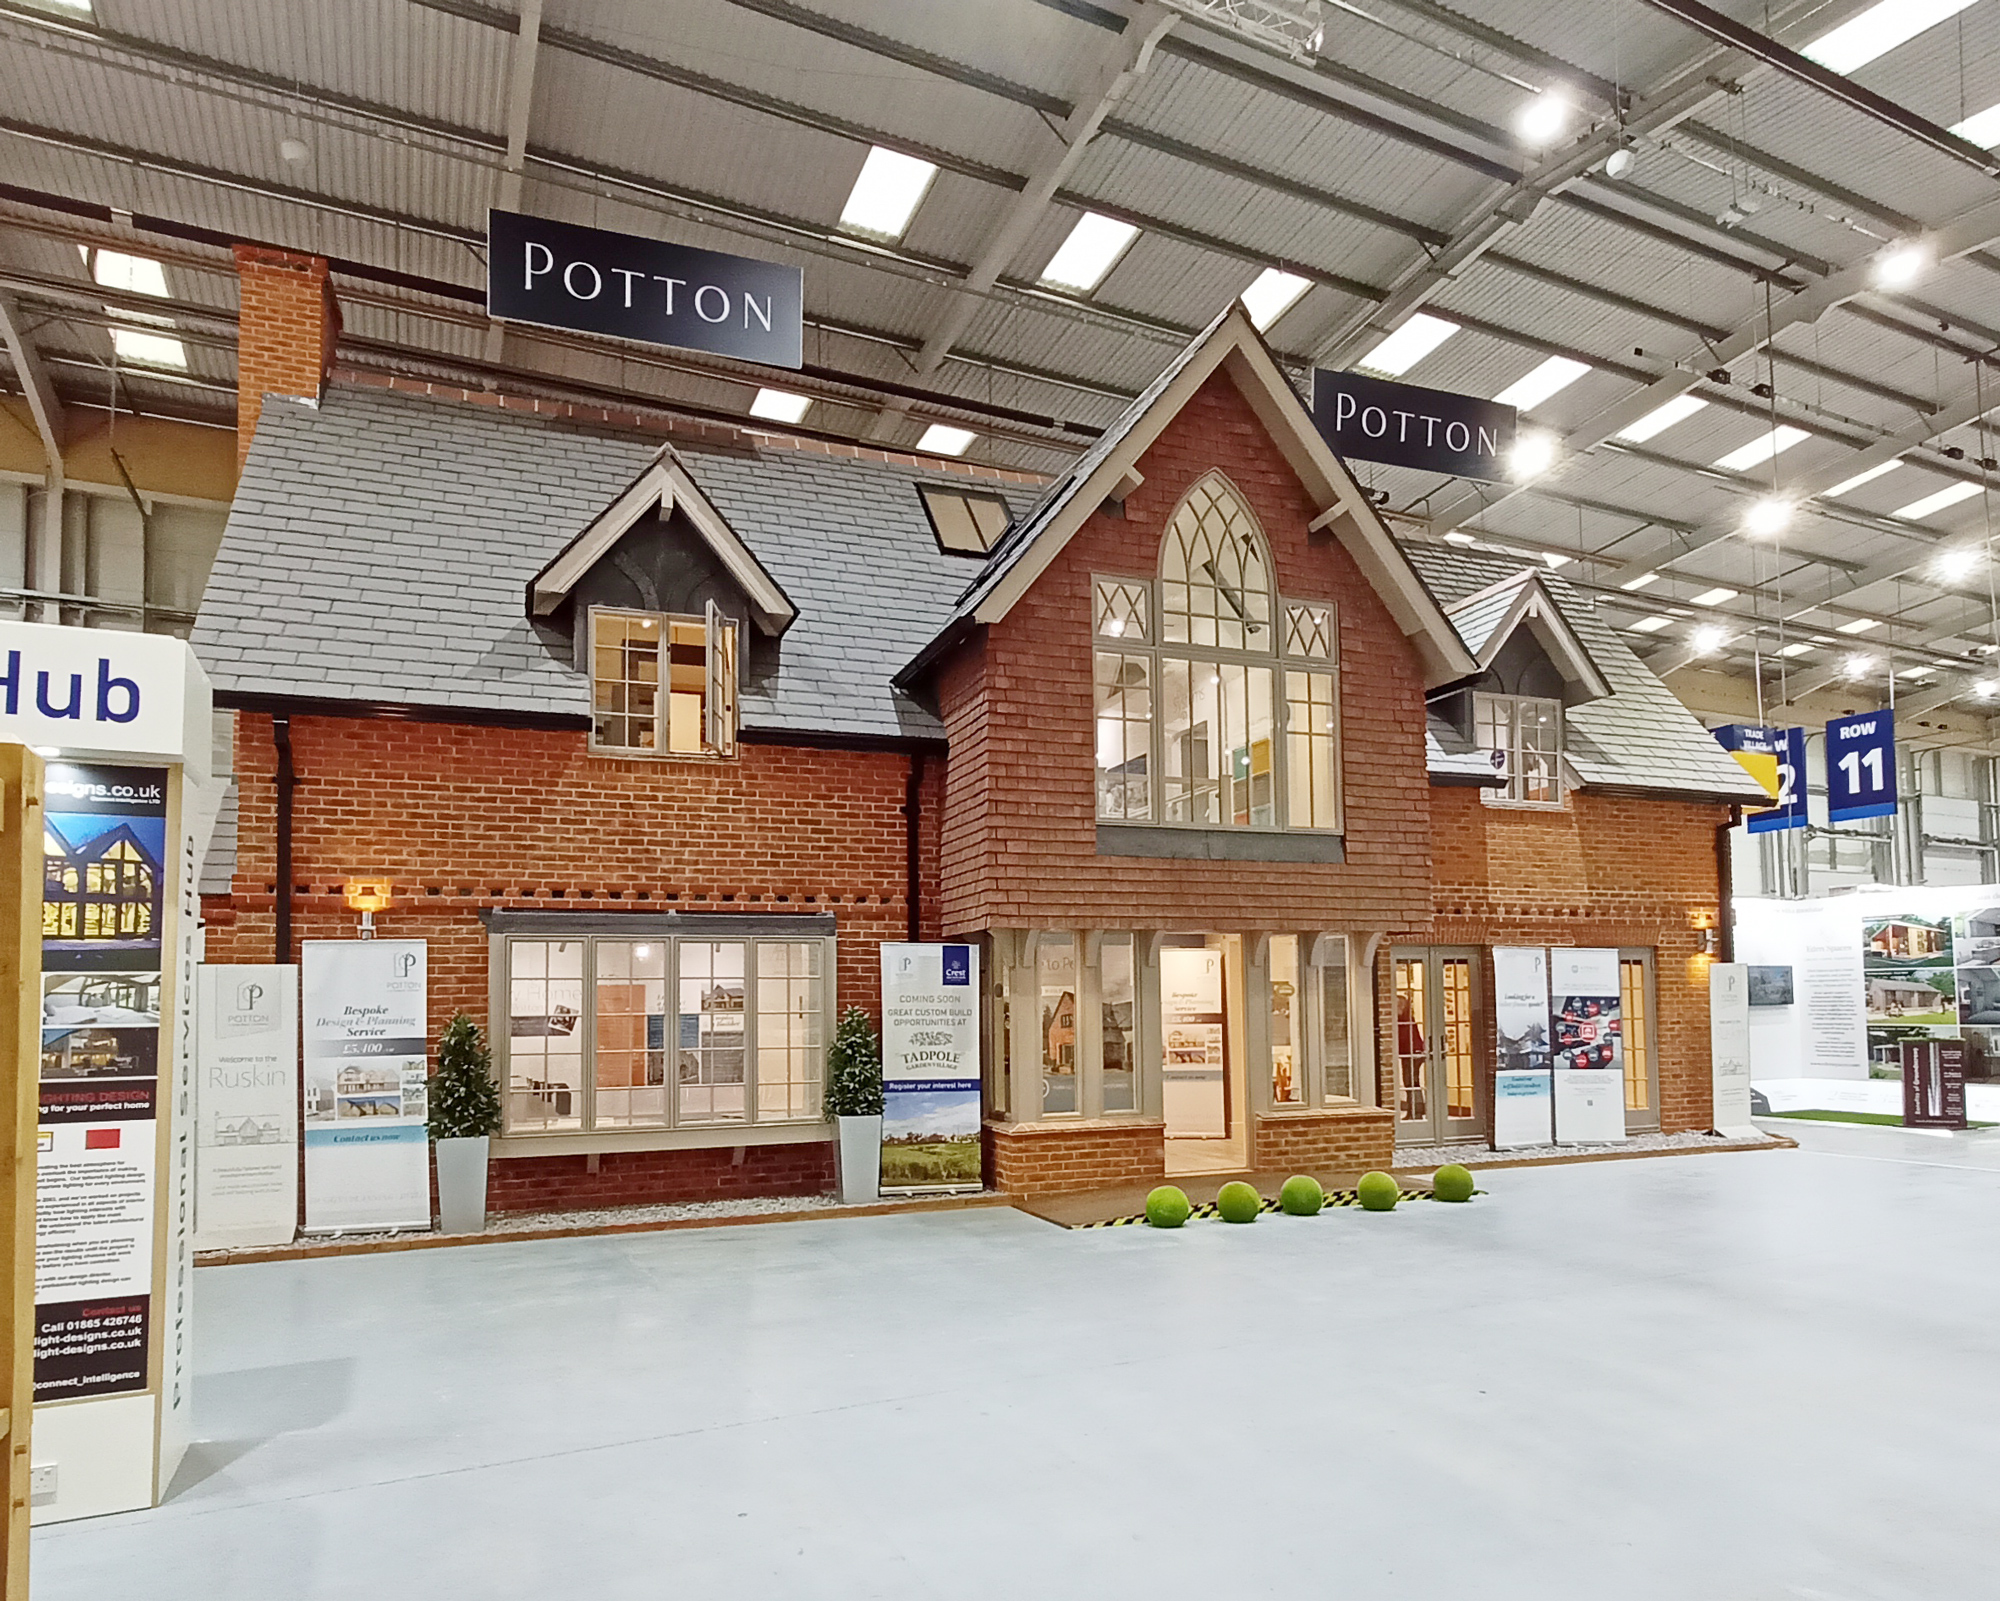 The Ruskin show home at the National Self Build & Renovation Centre